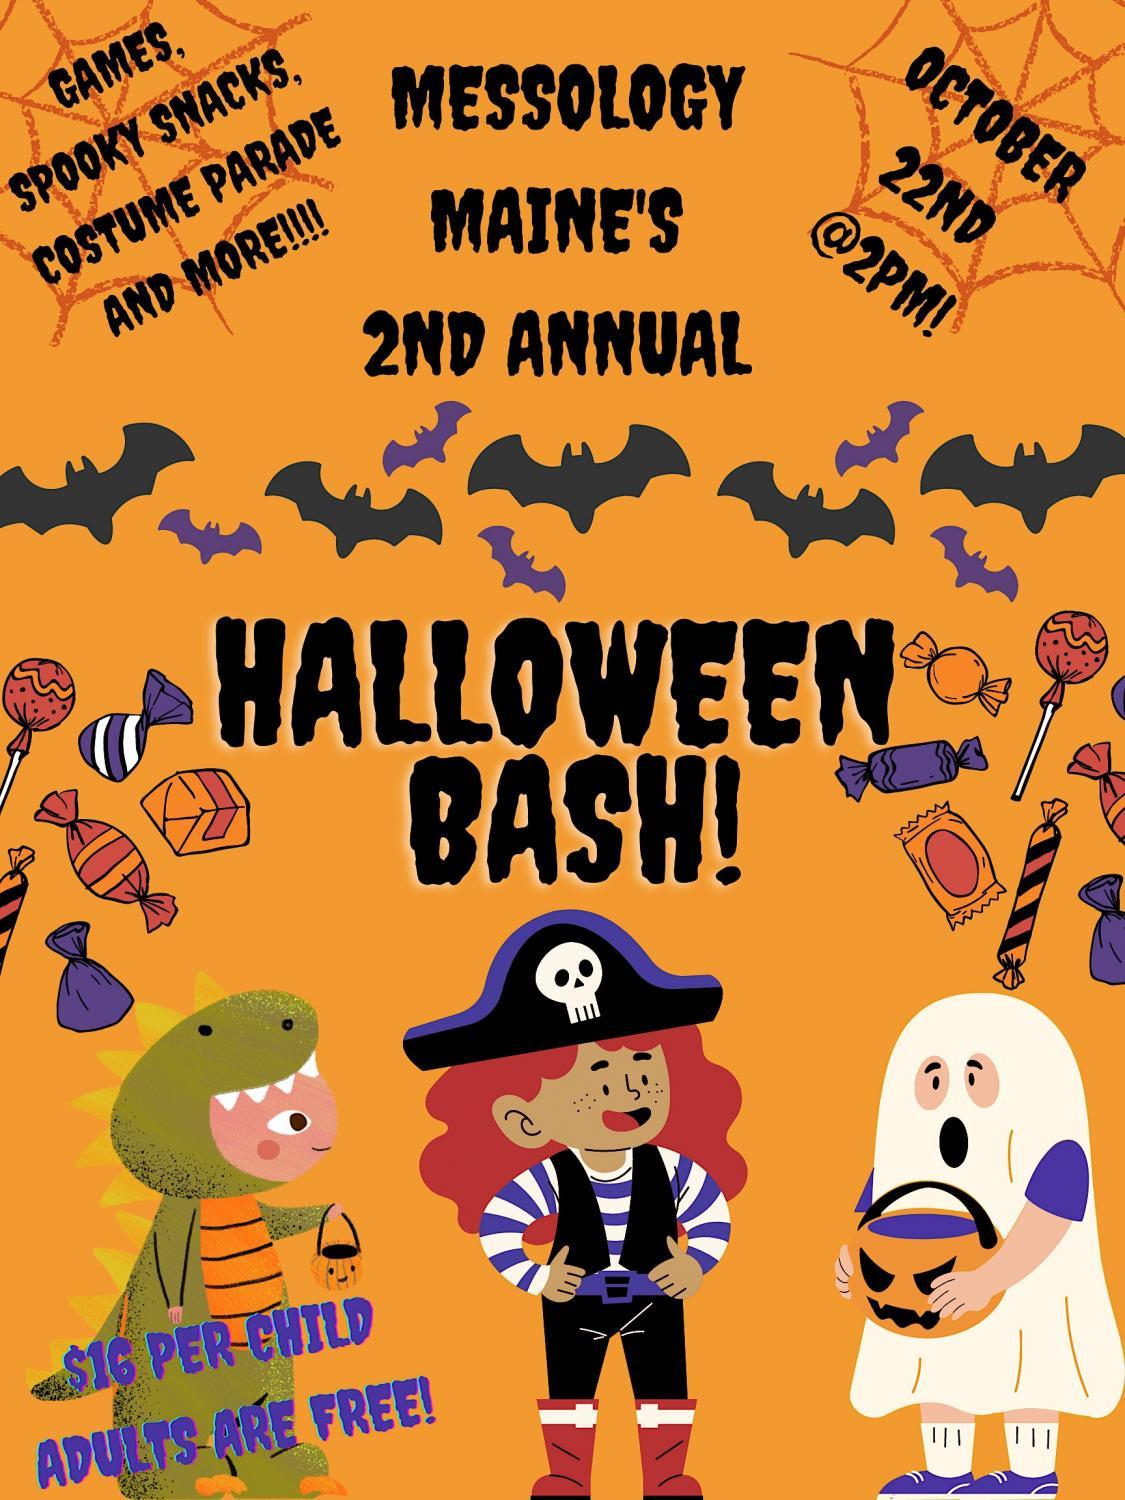 Messology Maine's 2nd Annual Halloween Bash!
Sat Oct 22, 2:00 PM - Sat Oct 22, 5:00 PM
in 3 days